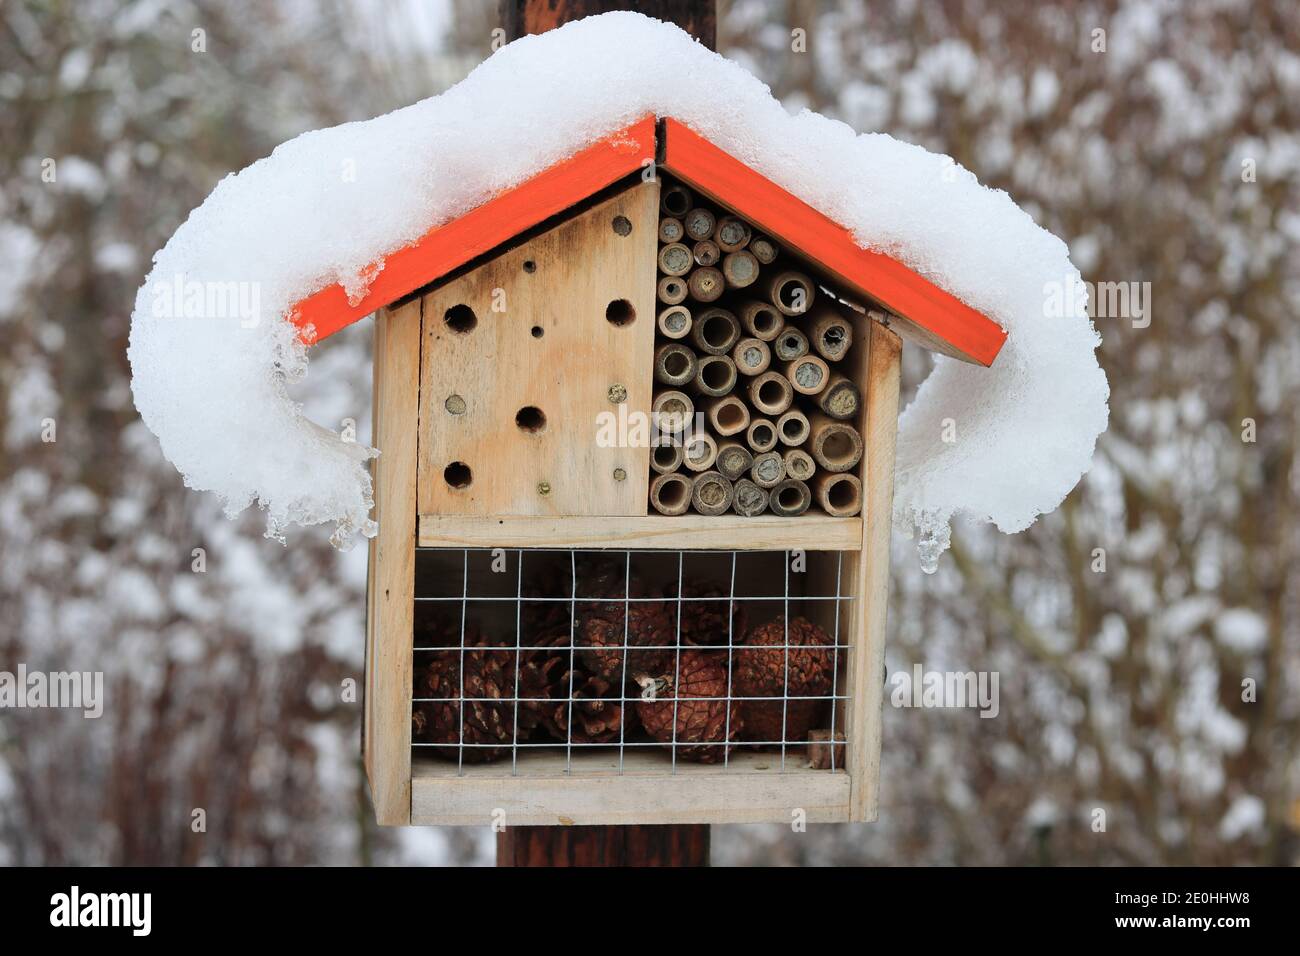 Snow on the roof of an insect hotel / bug house in the garden. Stock Photo